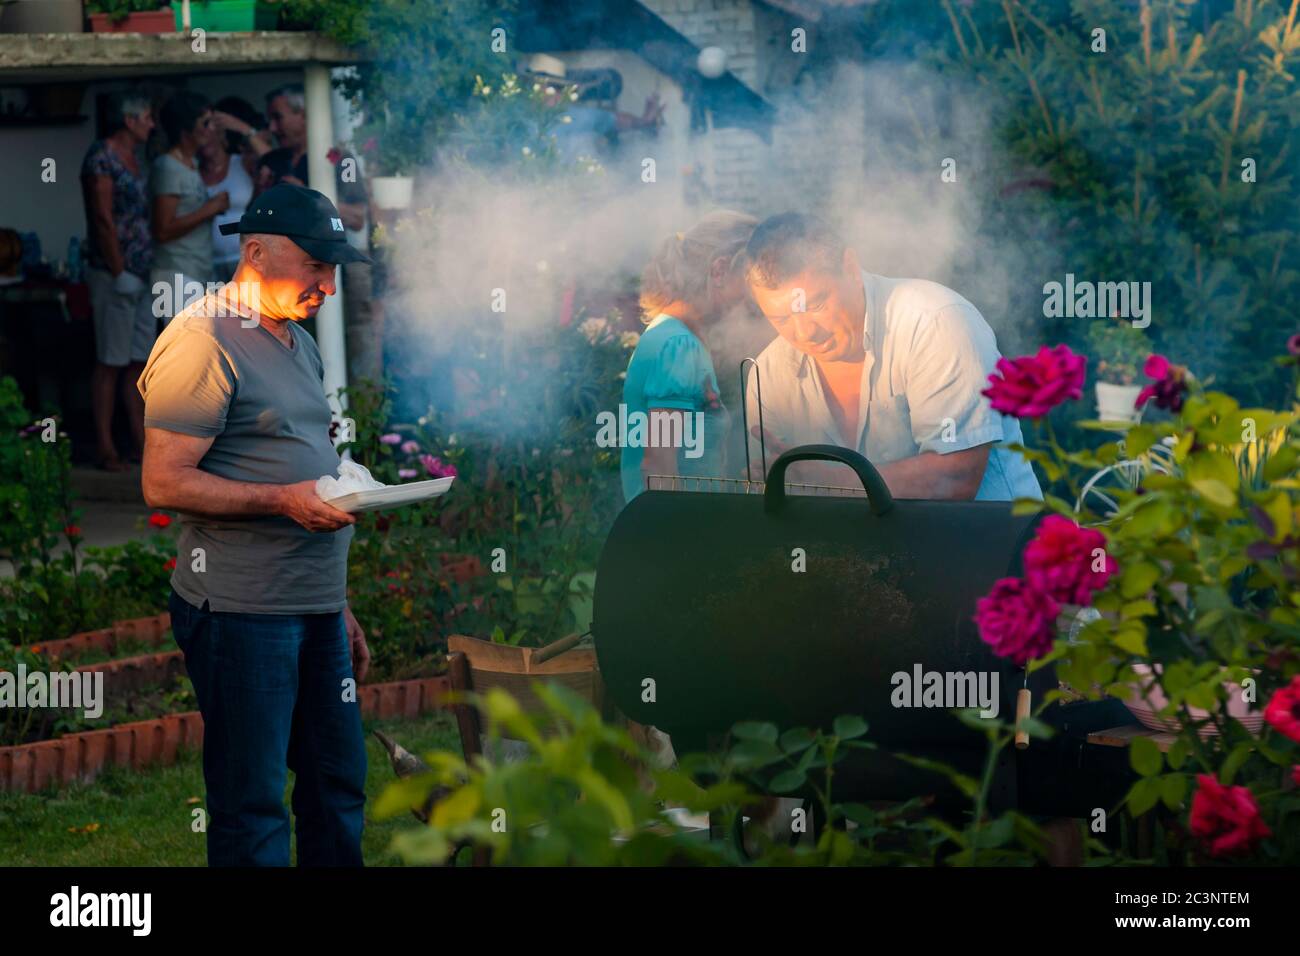 At charcoal grill in a Bulgarian dacha garden Stock Photo